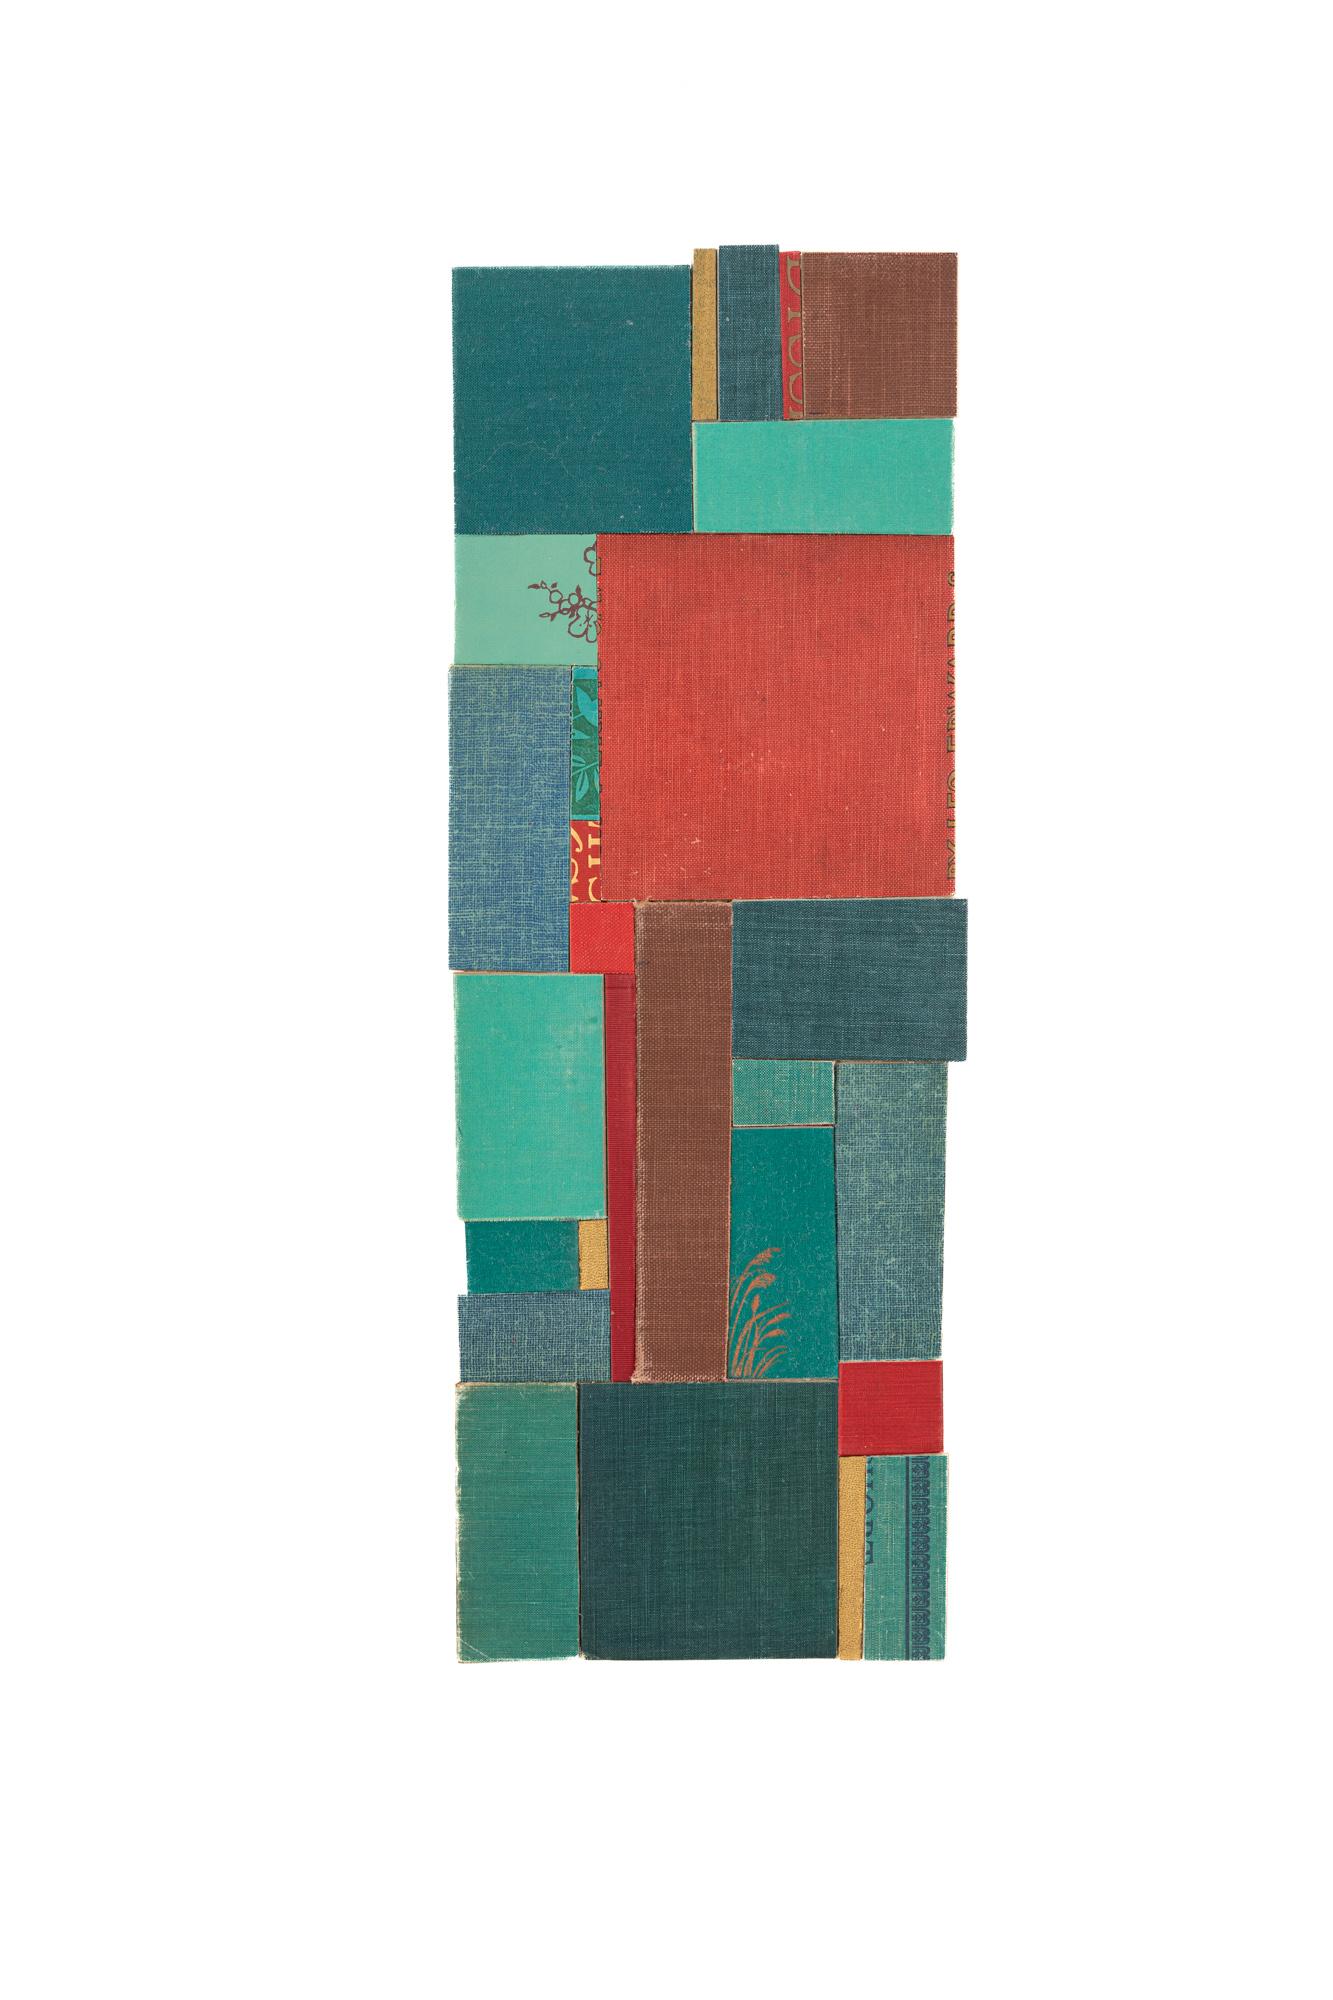 We encourage you to listen to your heart, mind, body, and spirit when viewing Clarity of Heart by artist Kerith Lisi. Get lost in the cool tones of greens and teals. Indulge in the comfort and warmth of the deep reds.   Clarity of Heart measures